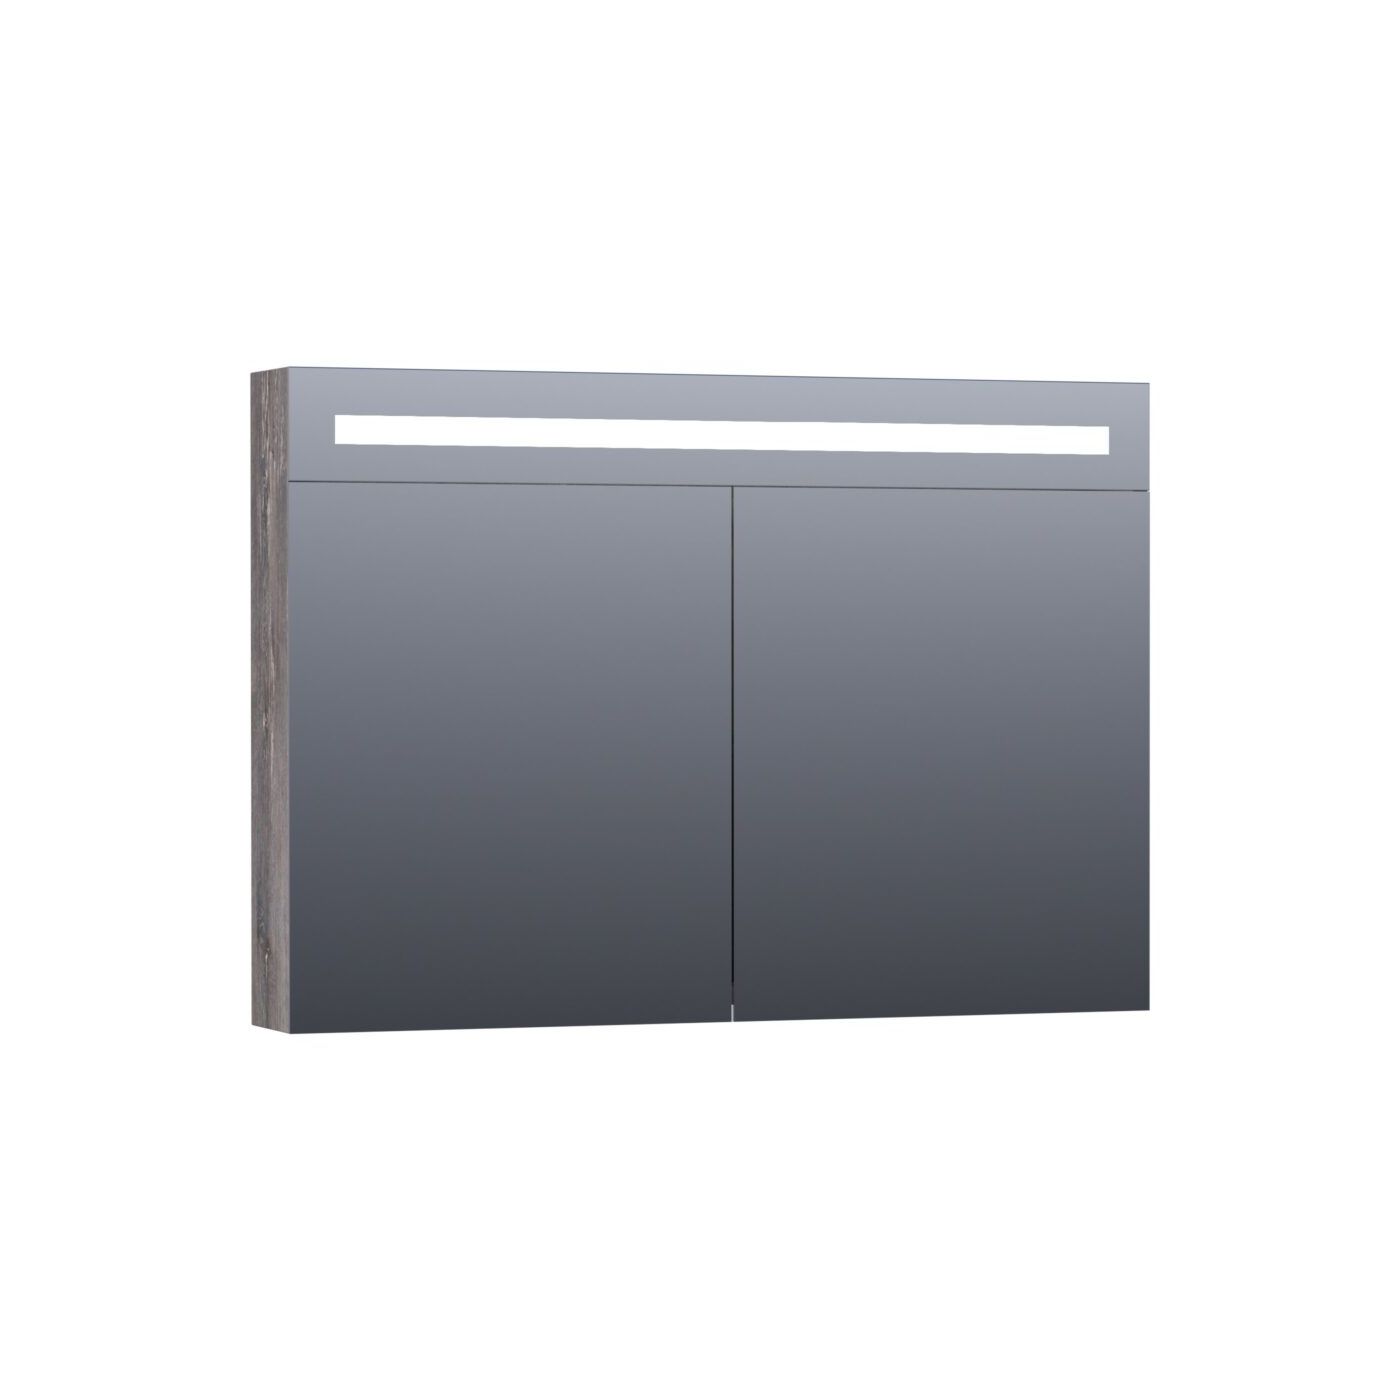 Tapo Double Face spiegelkast 100 grey canyon